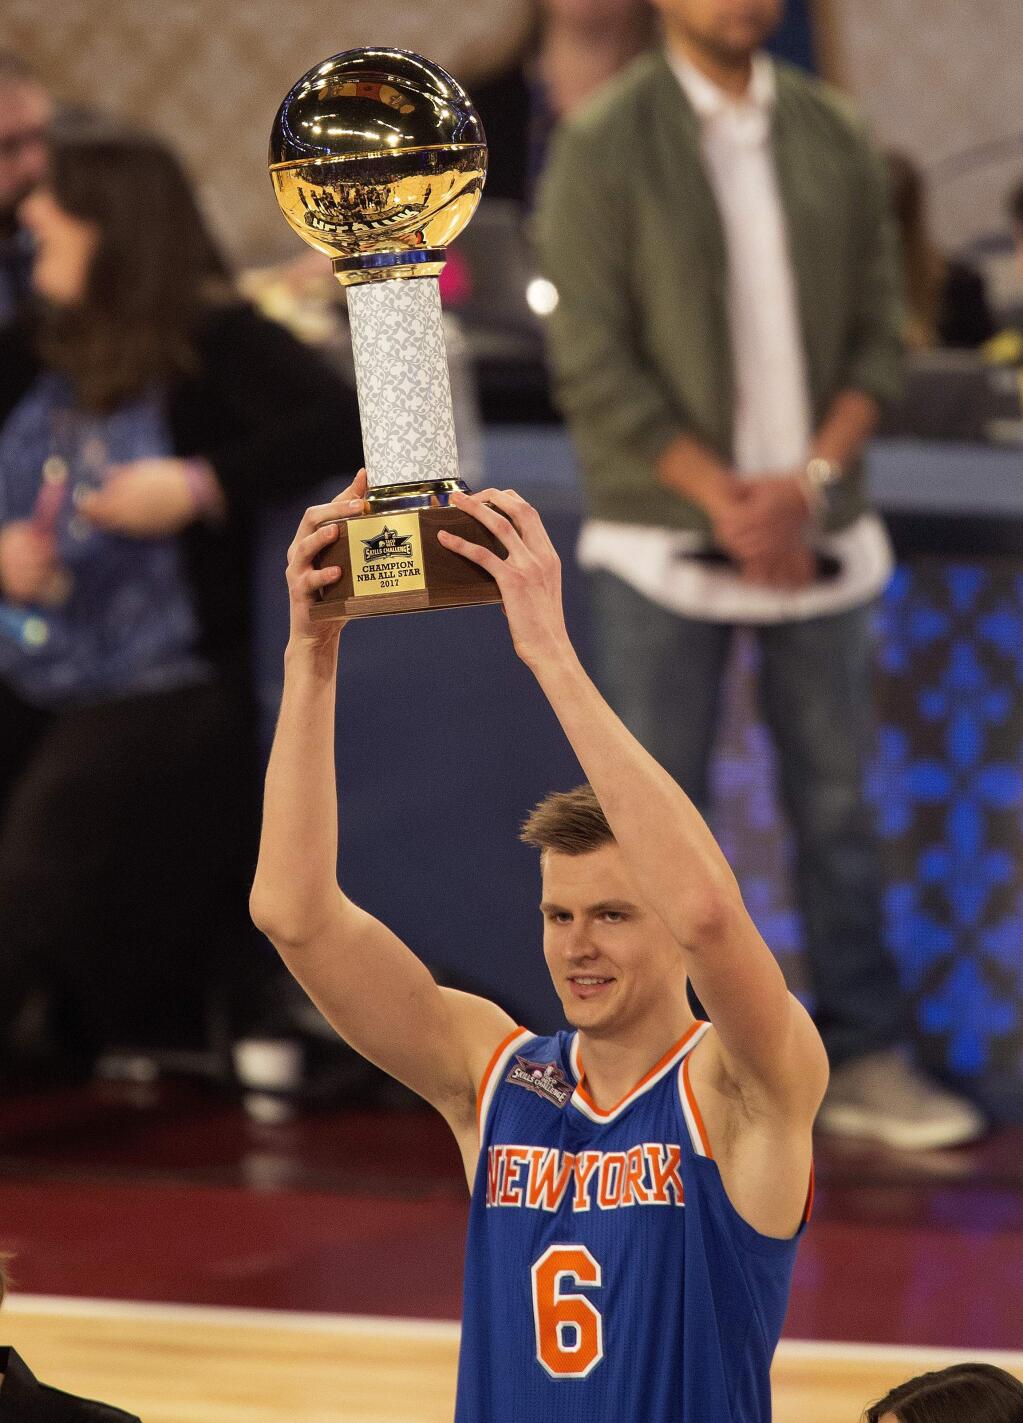 New York Knicks forward Kristaps Porzingis raises the trophy after winning the NBA Skills Challenge during the NBA All-Star Saturday Night events in New Orleans, Saturday, Feb. 18, 2017. (AP Photo/Max Becherer)